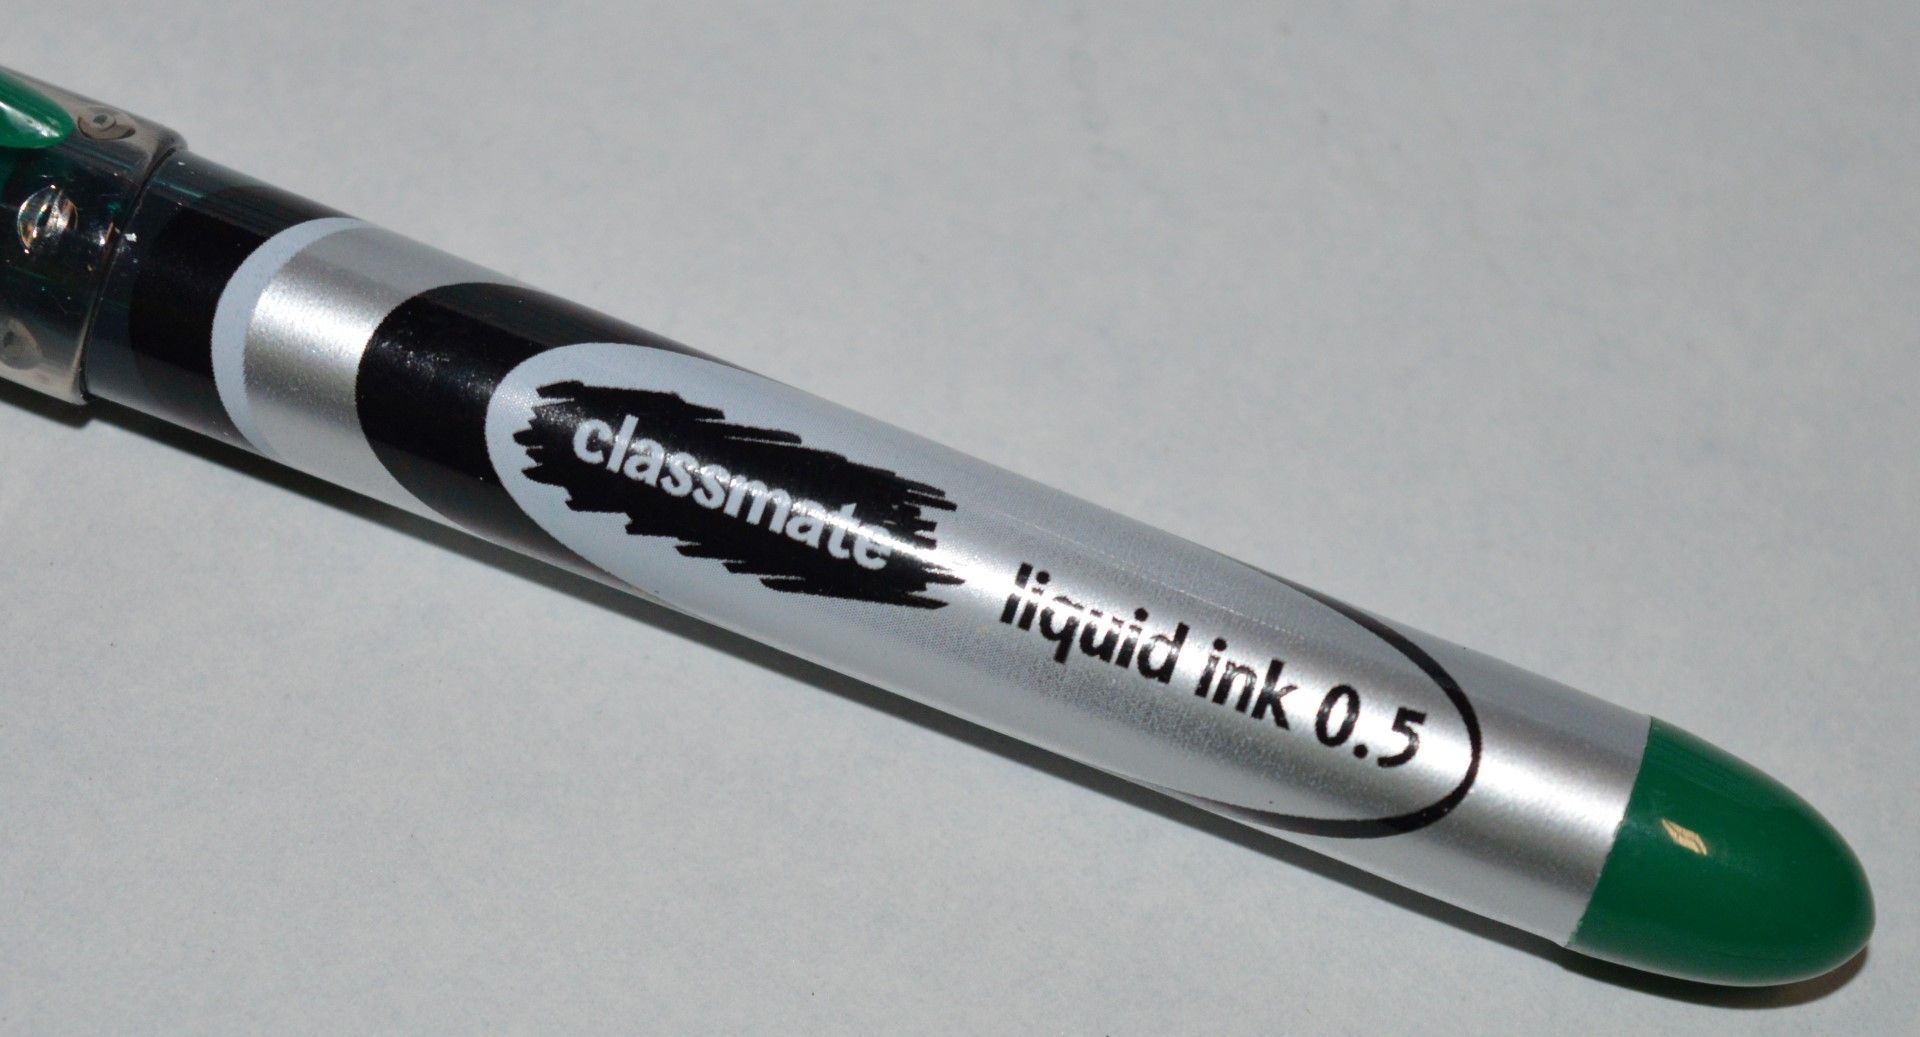 200 x Classmate Liquid Ink Pens - Needlepoint 0.5 - Includes 20 x Packs of 10 x Pens - New and - Image 3 of 3